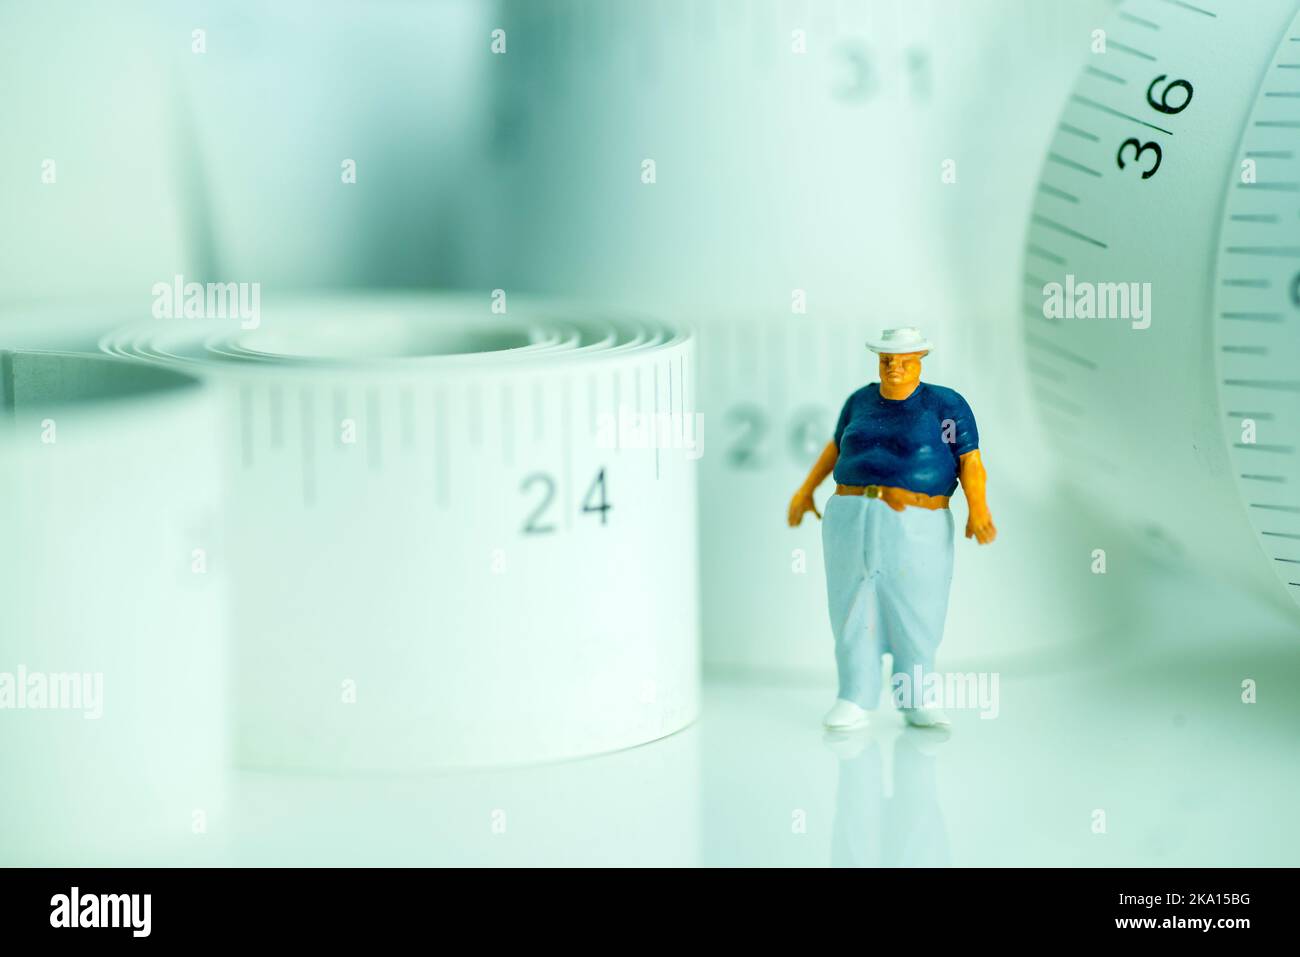 miniature figure of an obese man against measuring tape. Stock Photo